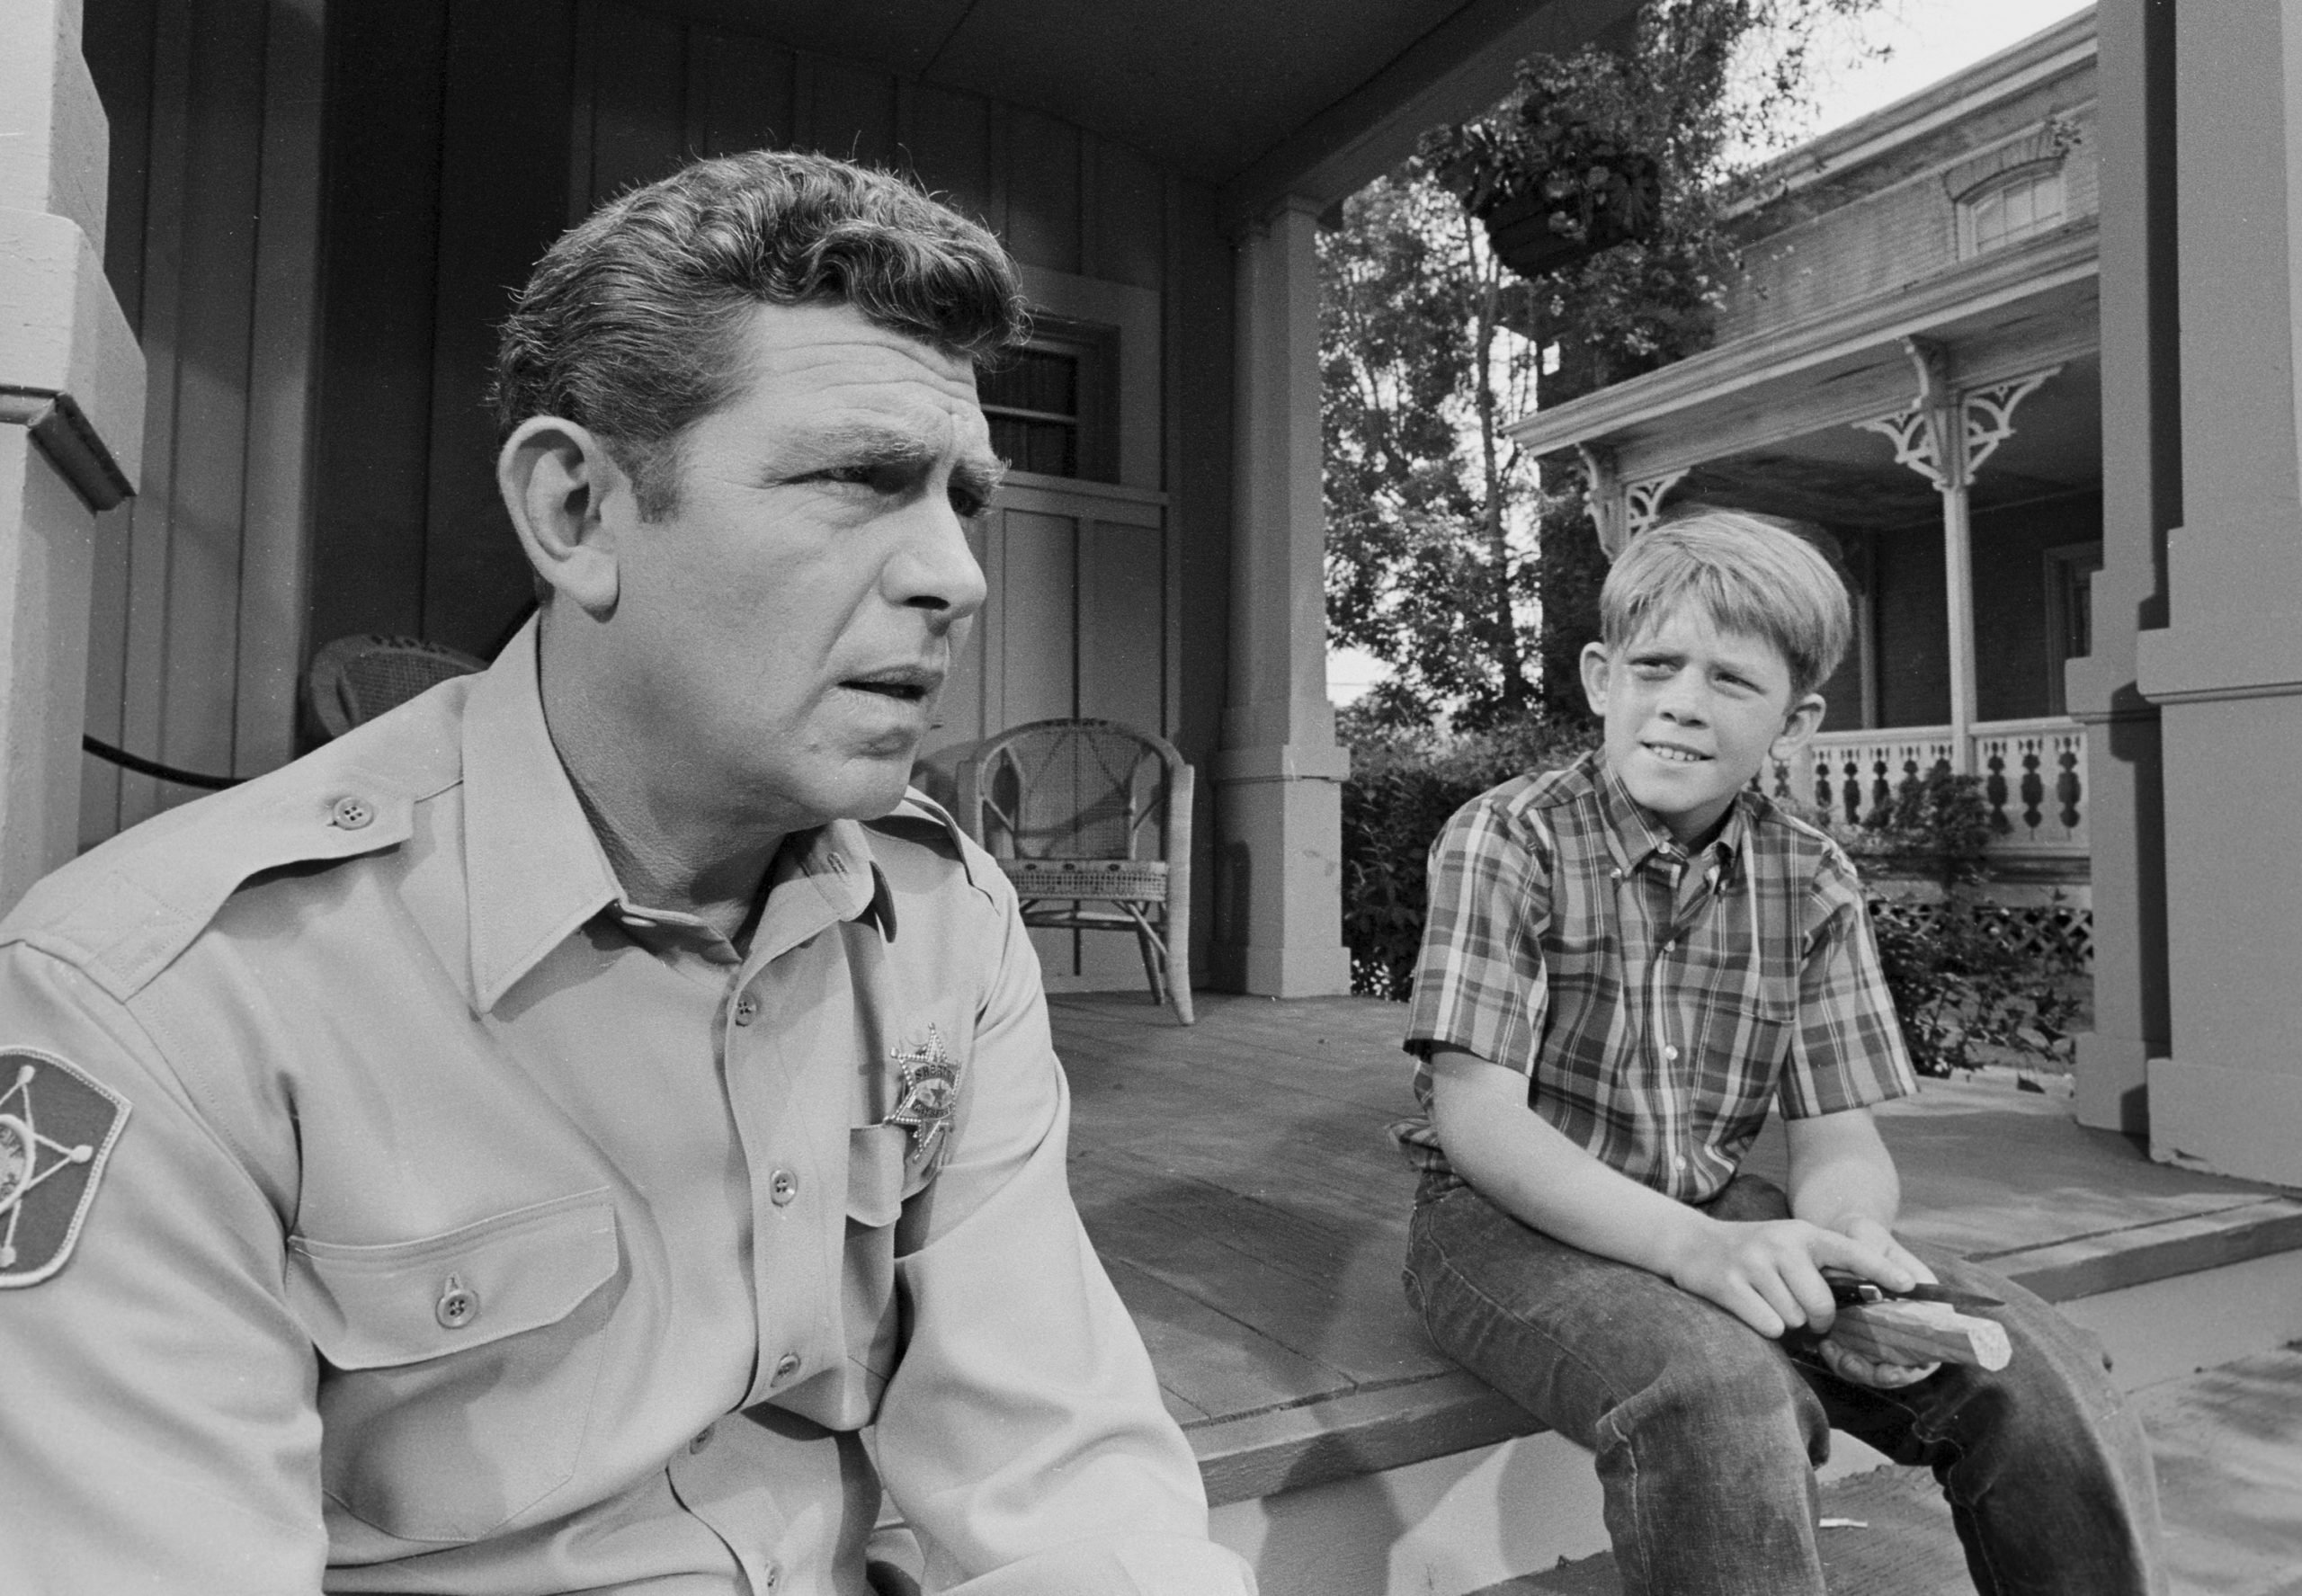 (L to R): Andy Griffith and Ron Howard in a scene from 'The Andy Griffith Show'